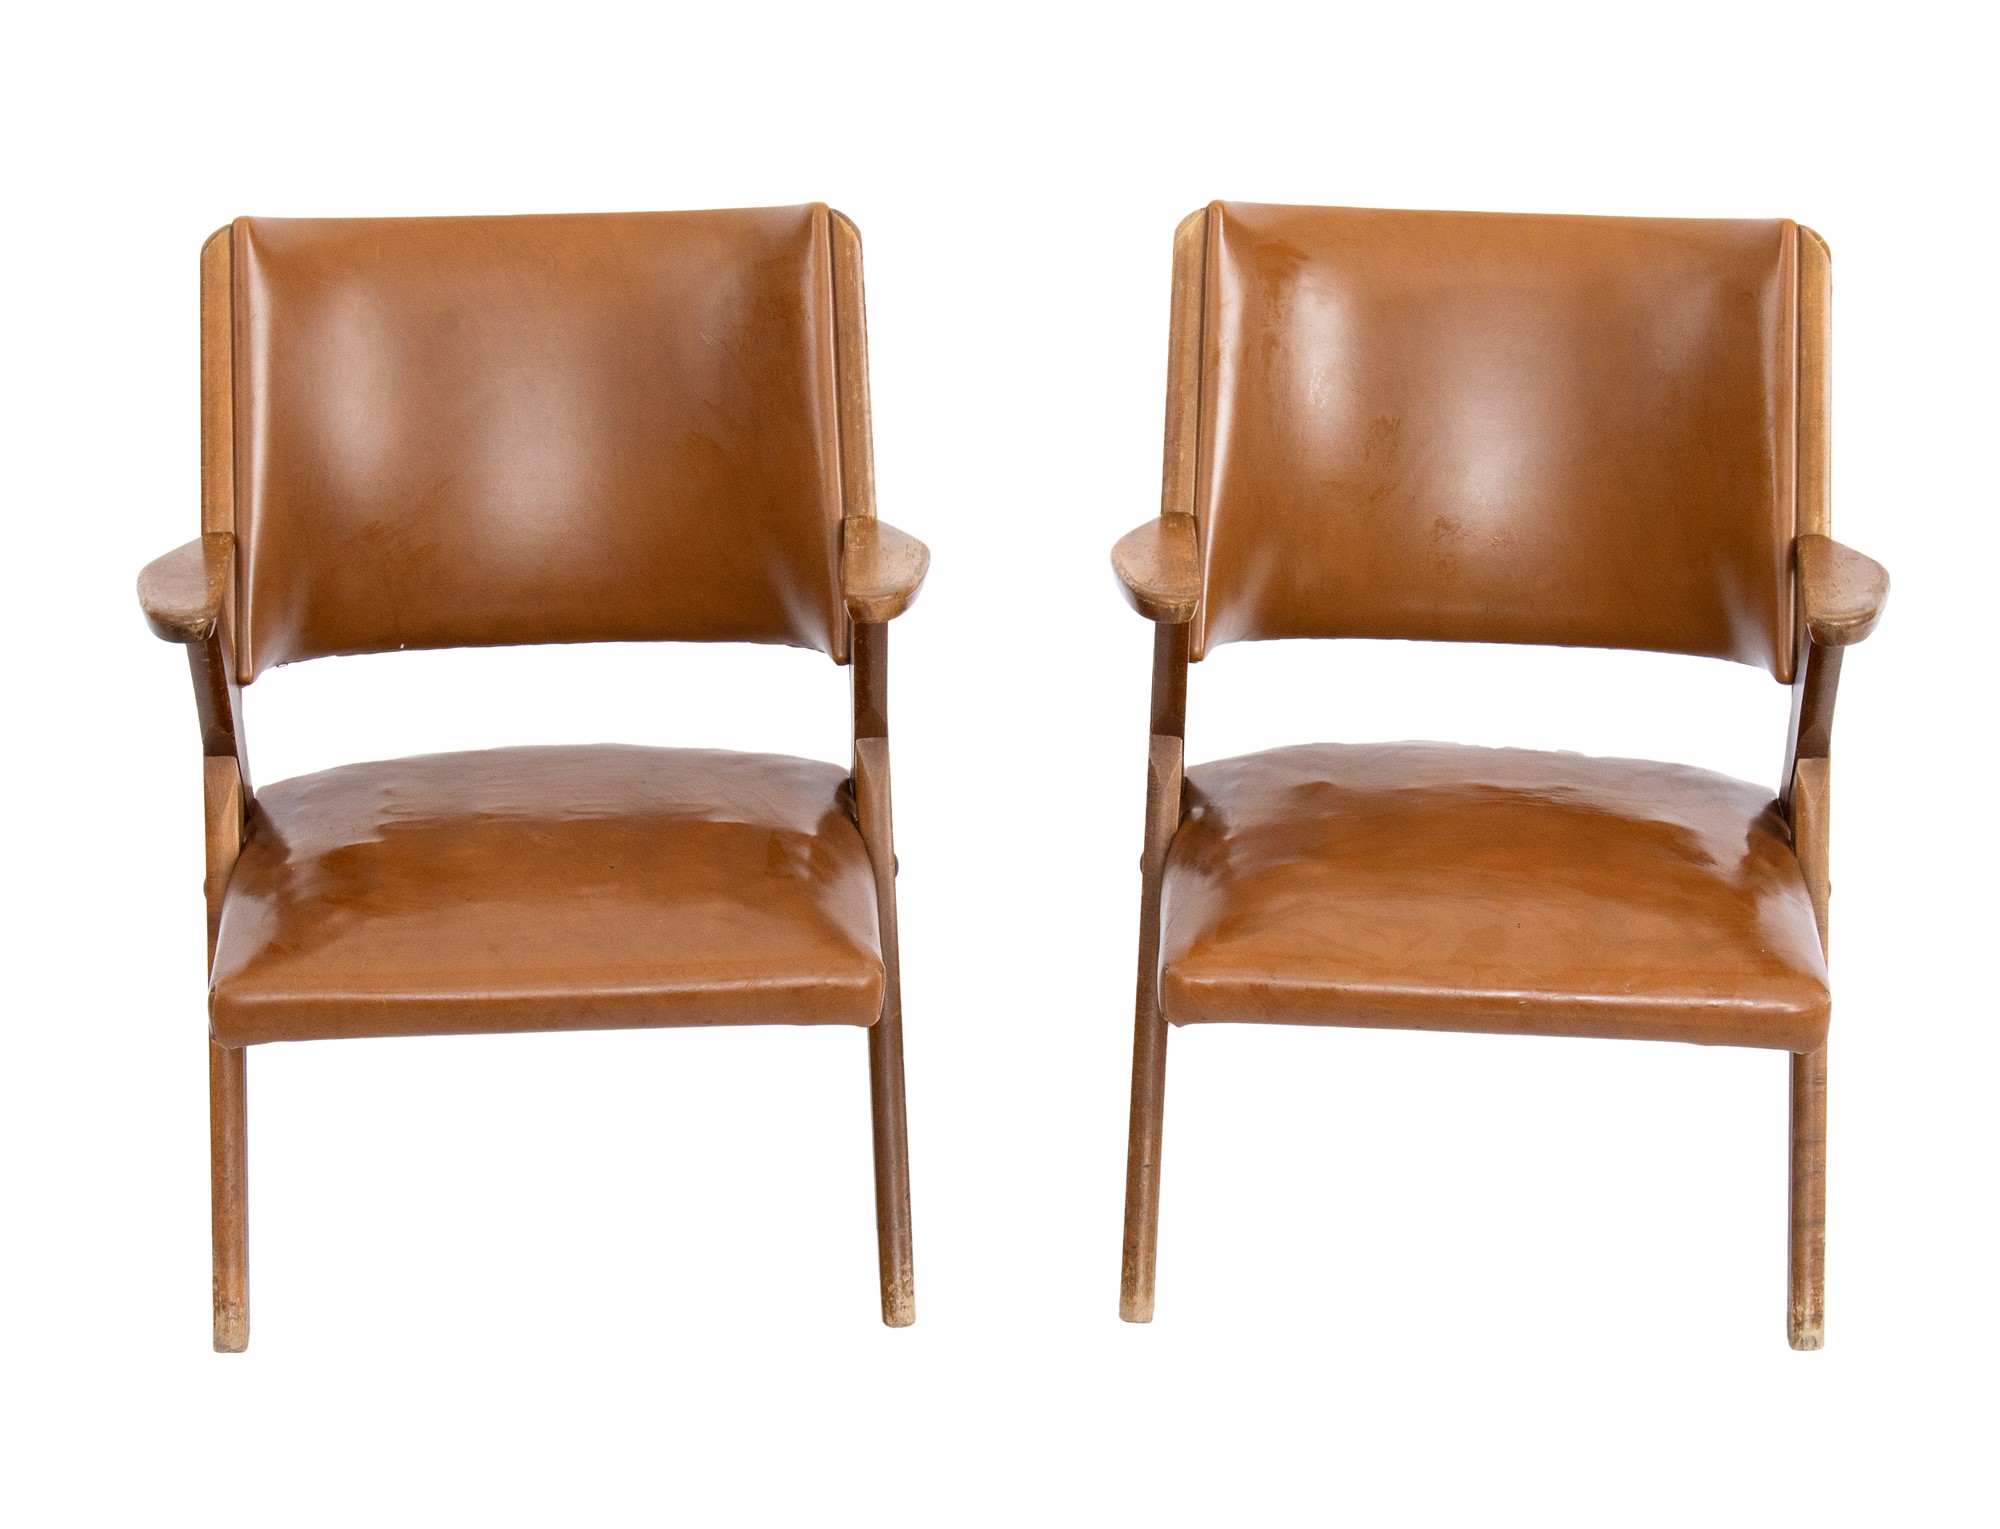 Dal Vera pair of armchairs with upholstered leather seats and backs - Image 8 of 17